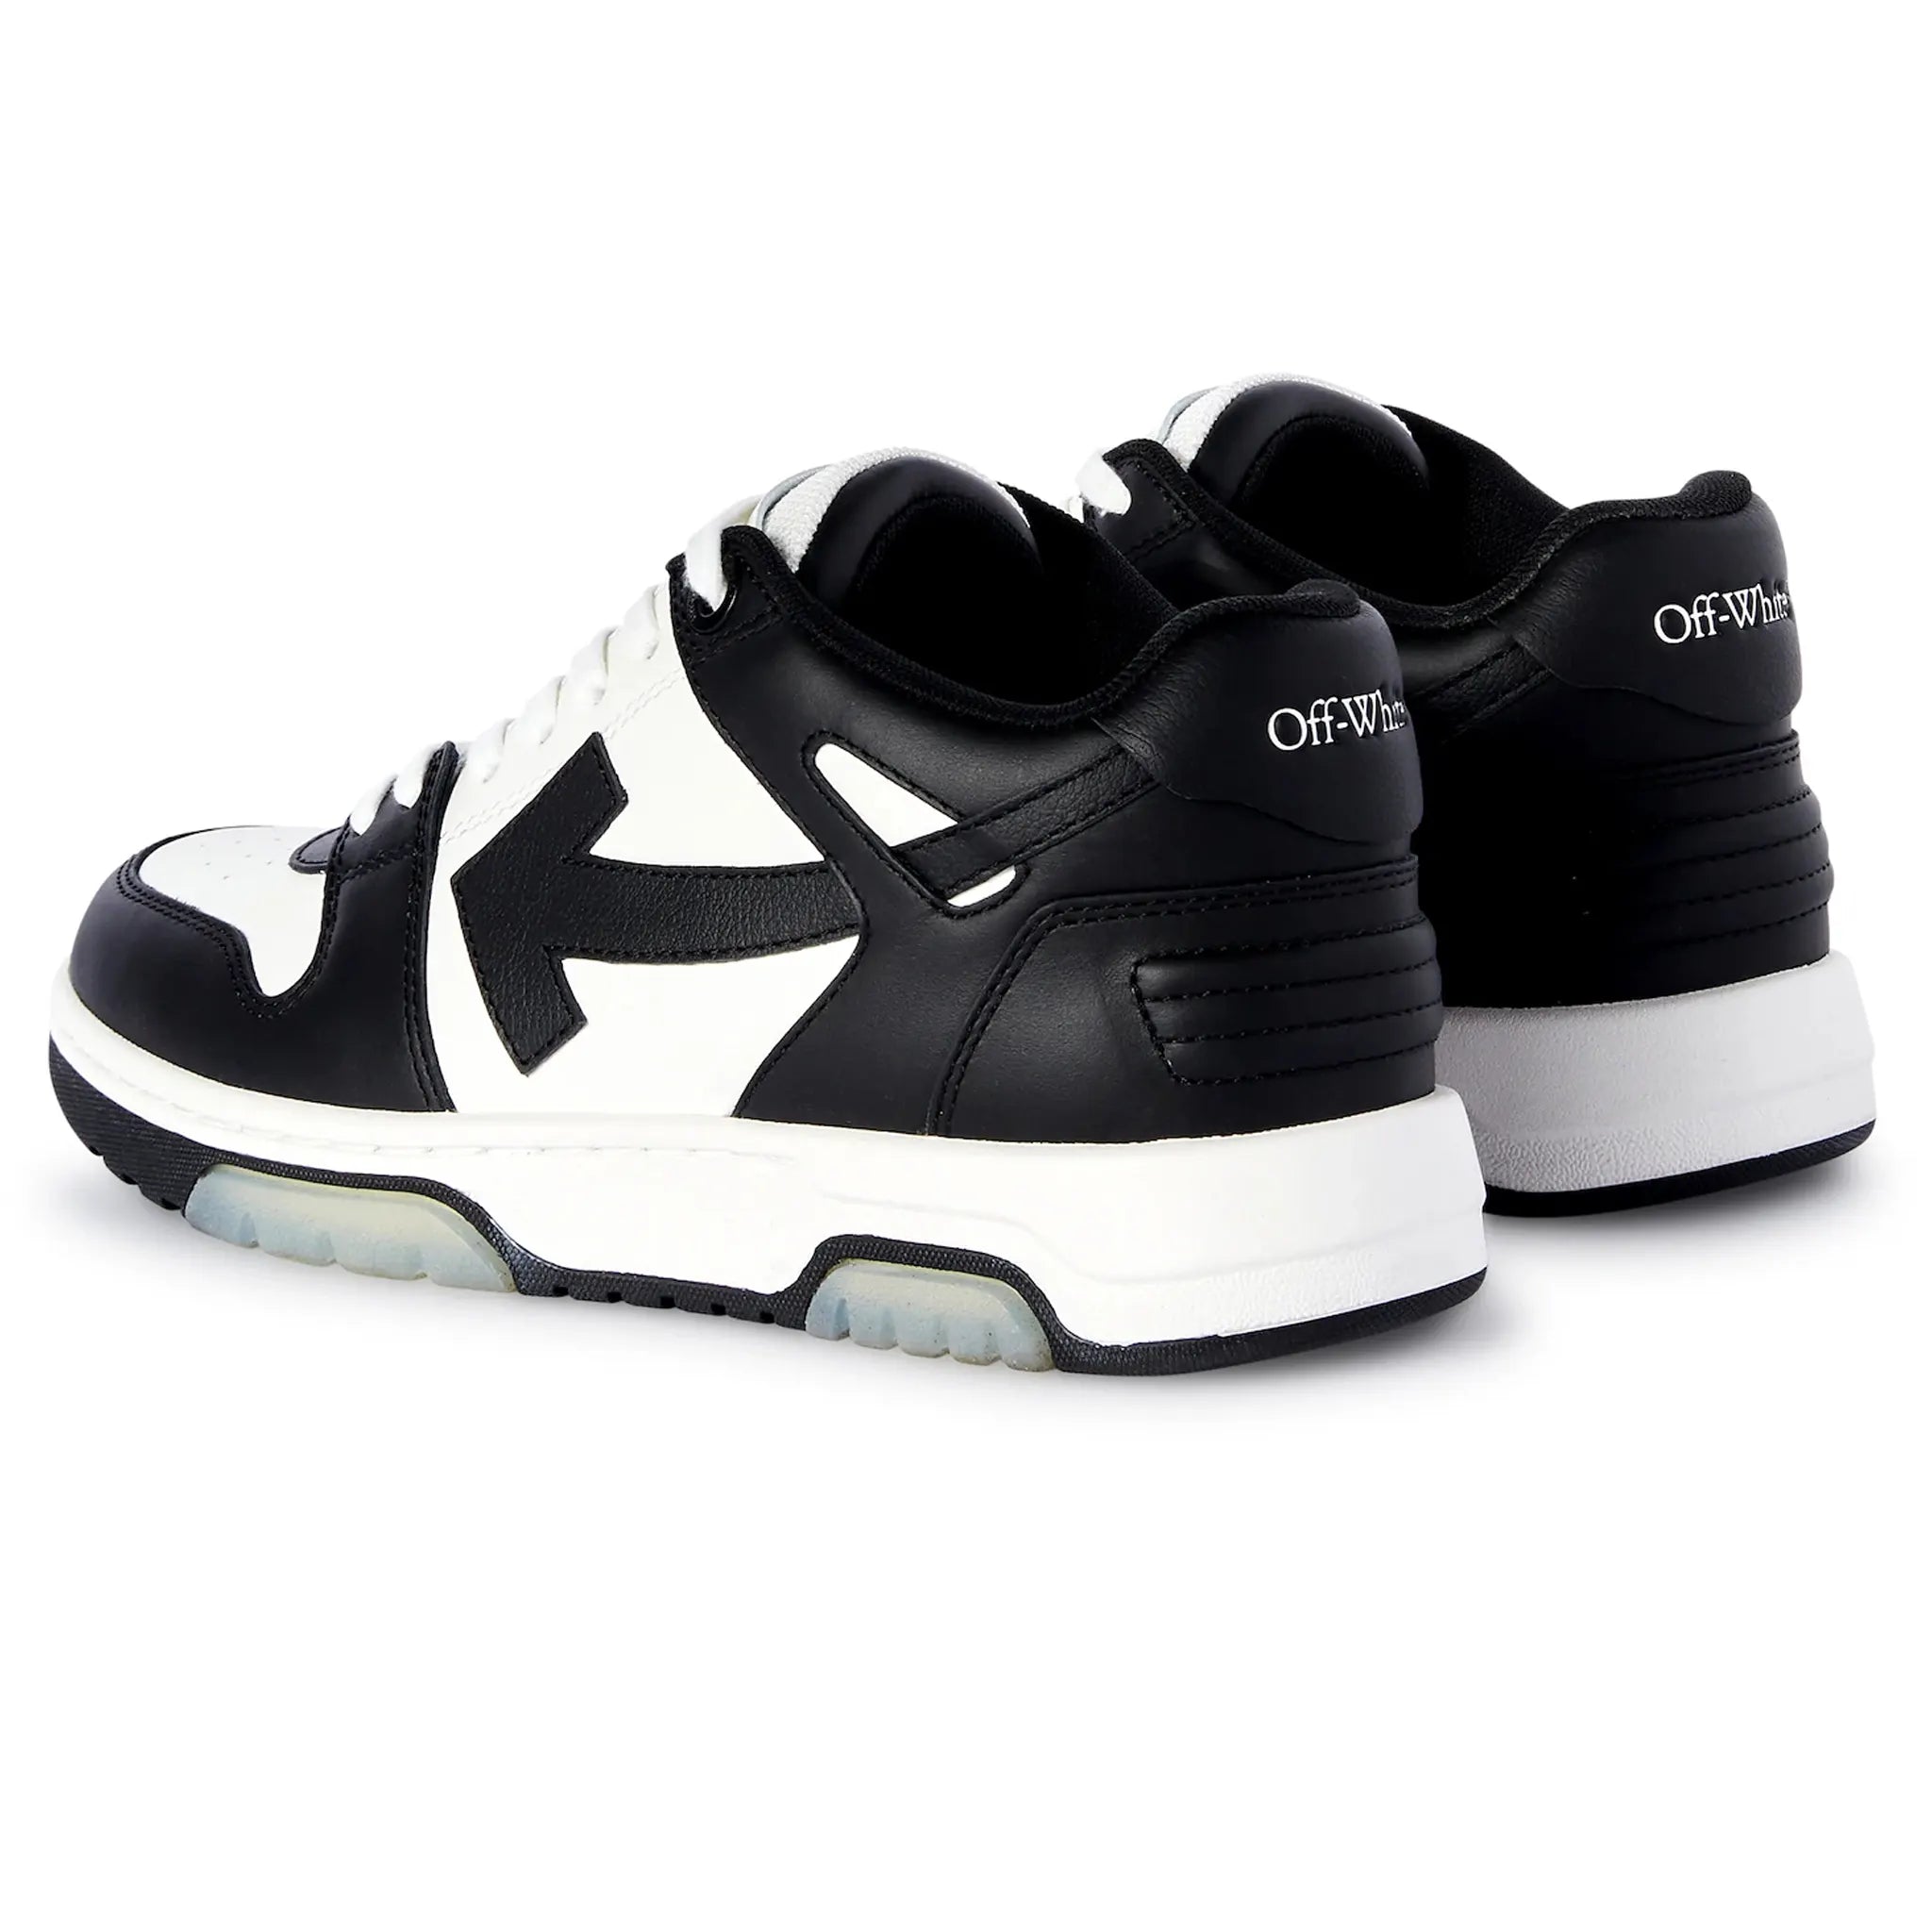 Back view of Off White Out Of Office Black White Trainers